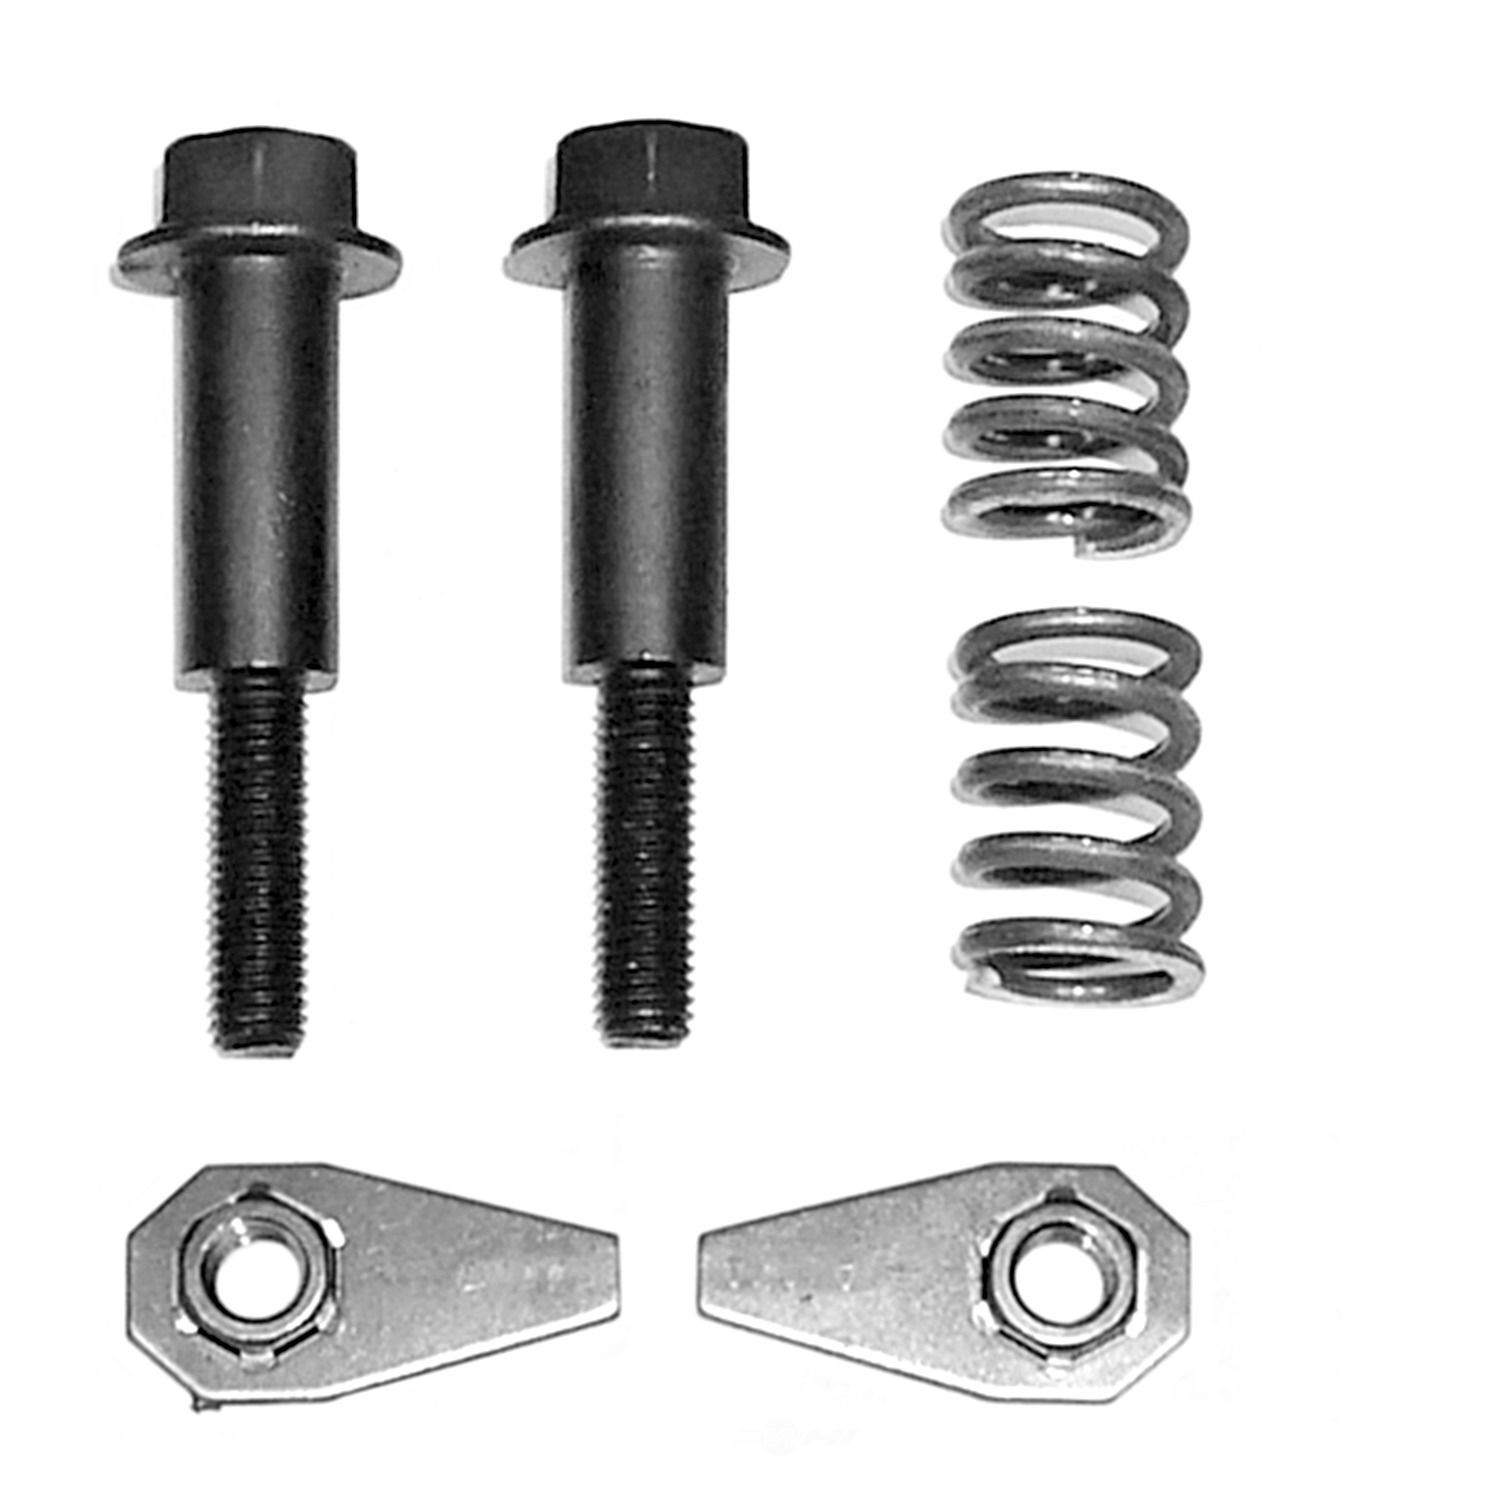 AP EXHAUST W/FEDERAL CONVERTER - Exhaust Bolt and Spring Set - APF 4973